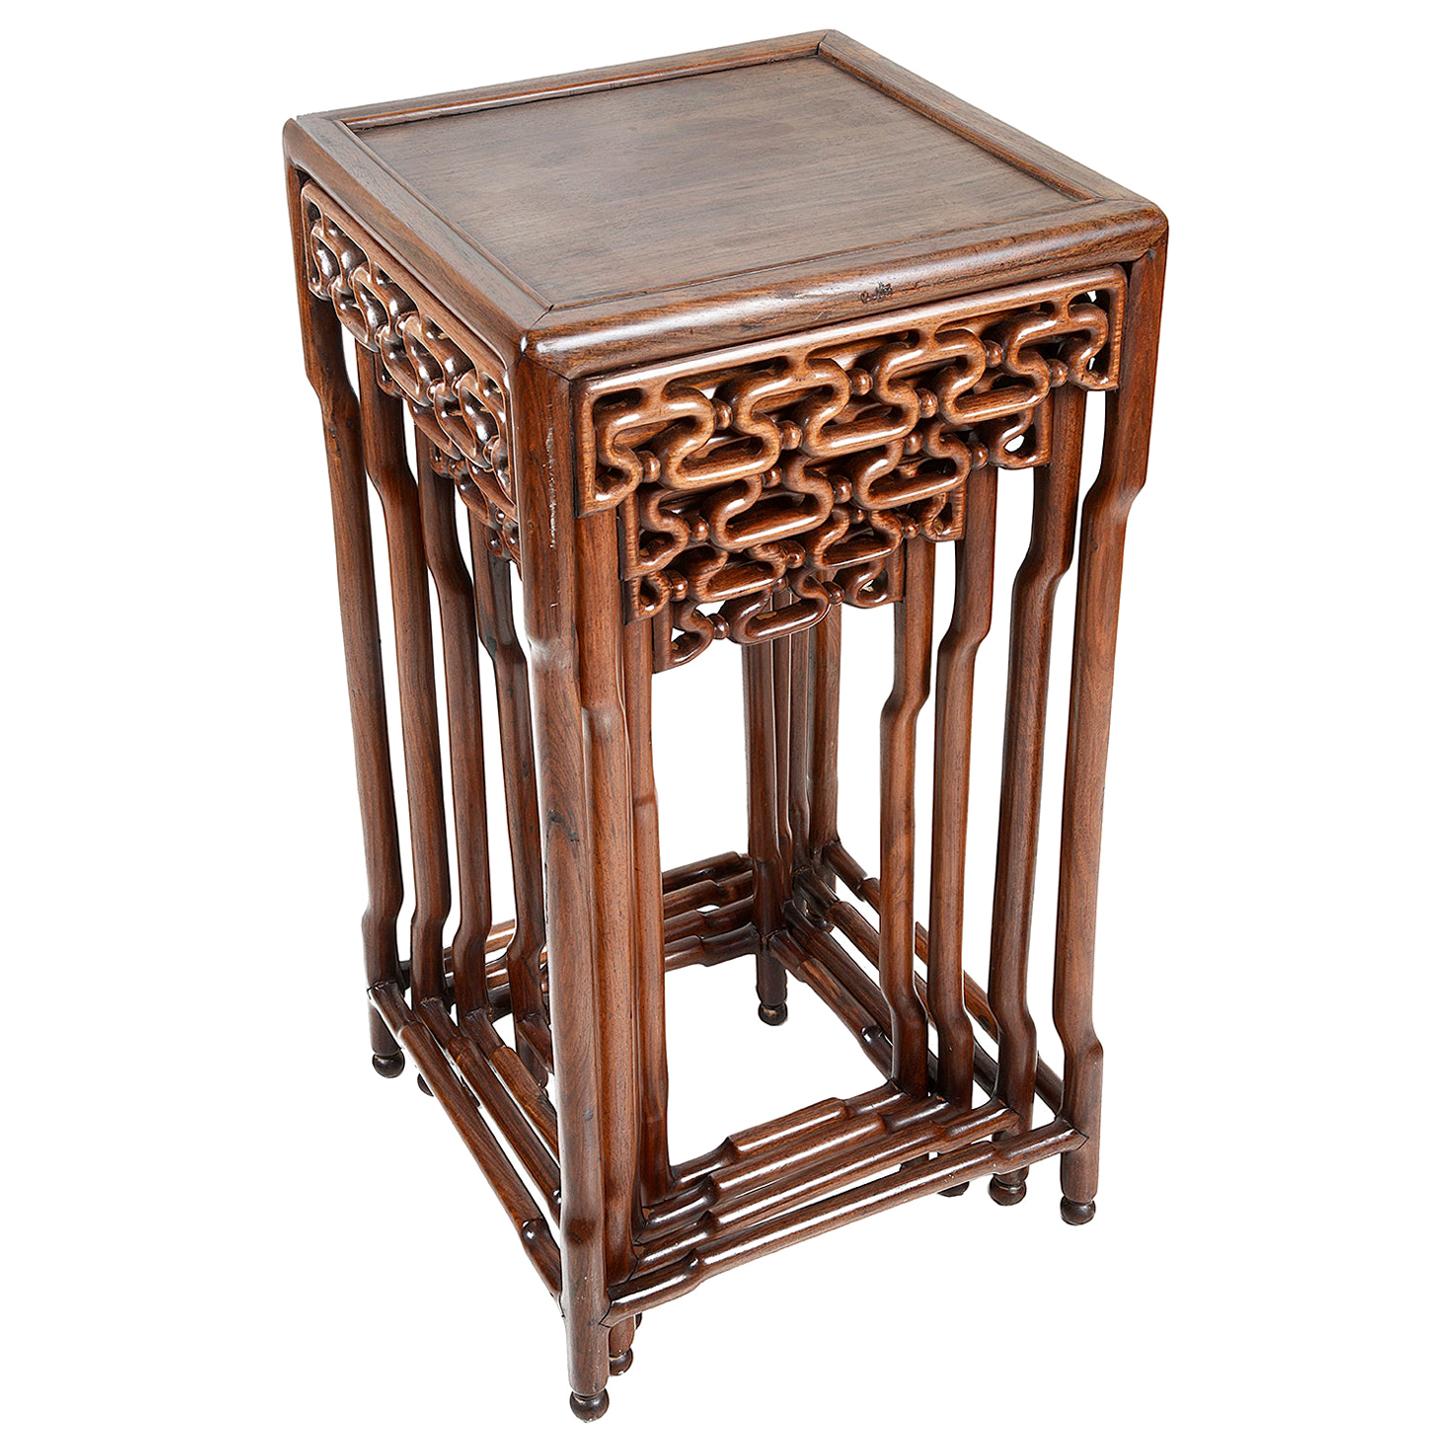 Nest of Four Chinese Hardwood Tables, Late 19th Century